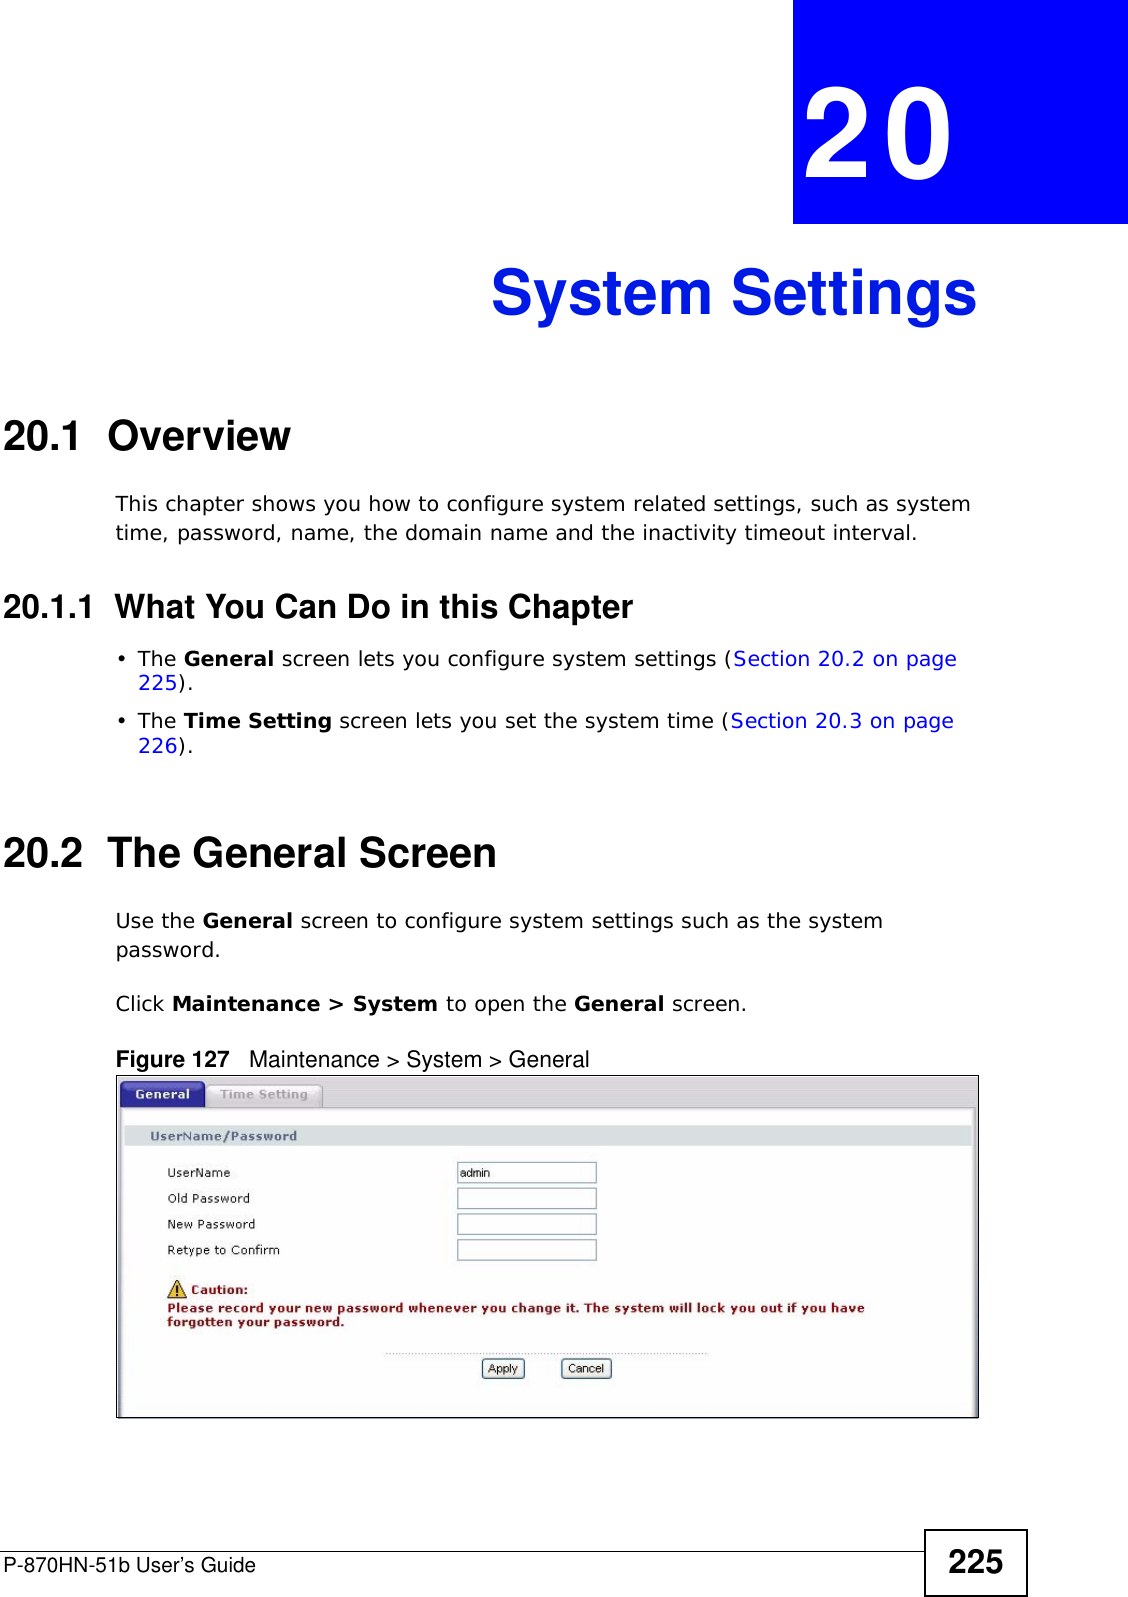 P-870HN-51b User’s Guide 225CHAPTER  20 System Settings20.1  Overview This chapter shows you how to configure system related settings, such as system time, password, name, the domain name and the inactivity timeout interval.    20.1.1  What You Can Do in this Chapter•The General screen lets you configure system settings (Section 20.2 on page 225).•The Time Setting screen lets you set the system time (Section 20.3 on page 226).20.2  The General ScreenUse the General screen to configure system settings such as the system password.Click Maintenance &gt; System to open the General screen. Figure 127   Maintenance &gt; System &gt; General